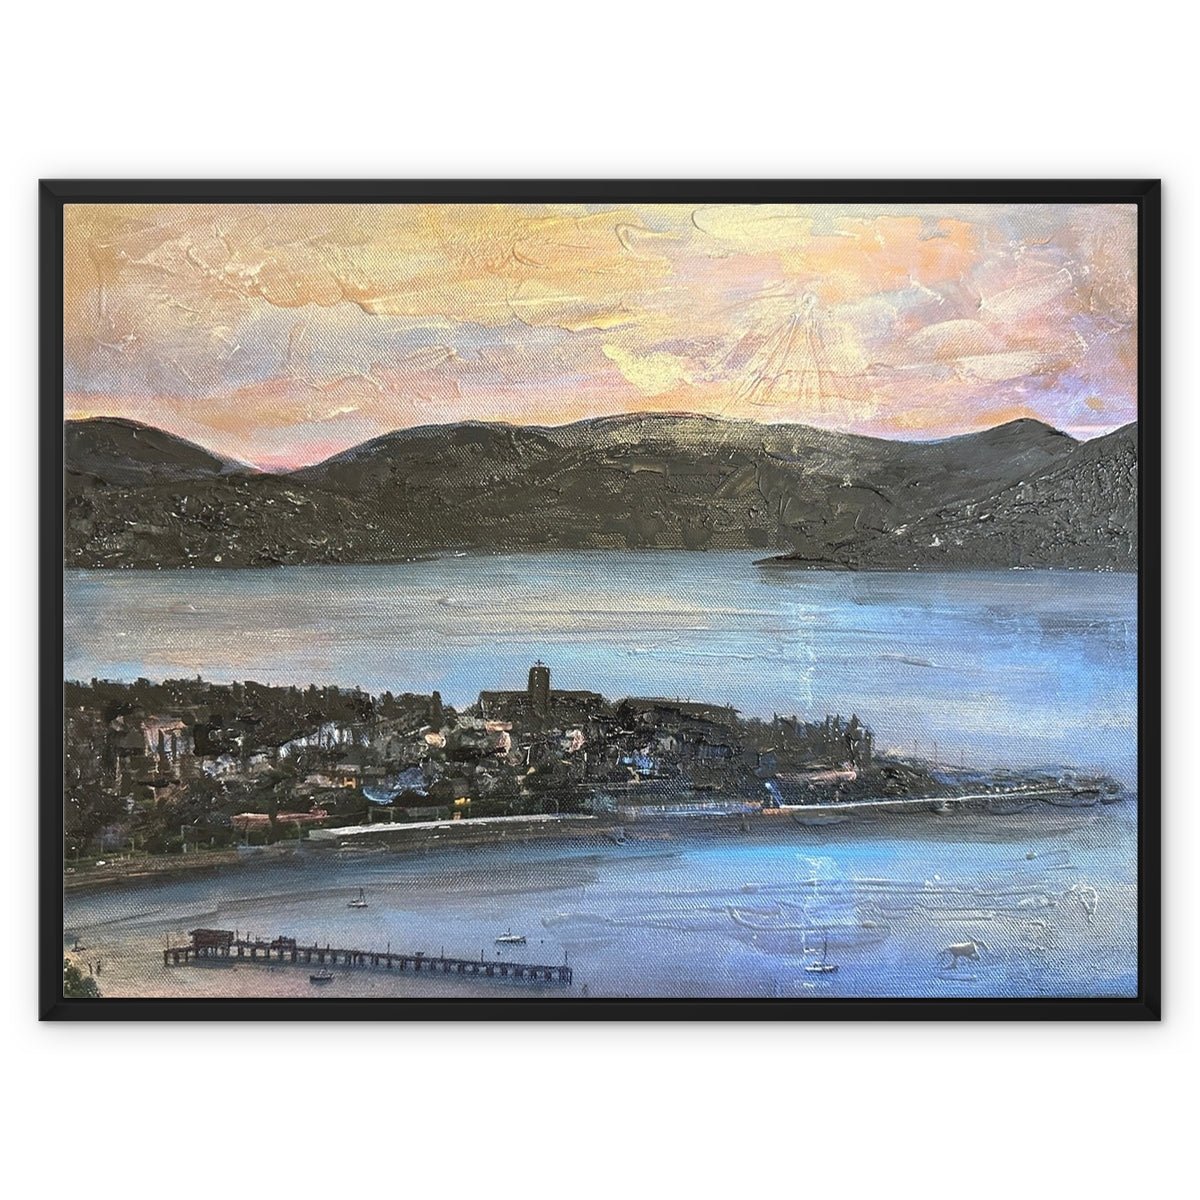 From Lyle Hill Painting | Framed Canvas From Scotland-Floating Framed Canvas Prints-River Clyde Art Gallery-32"x24"-Black Frame-Paintings, Prints, Homeware, Art Gifts From Scotland By Scottish Artist Kevin Hunter